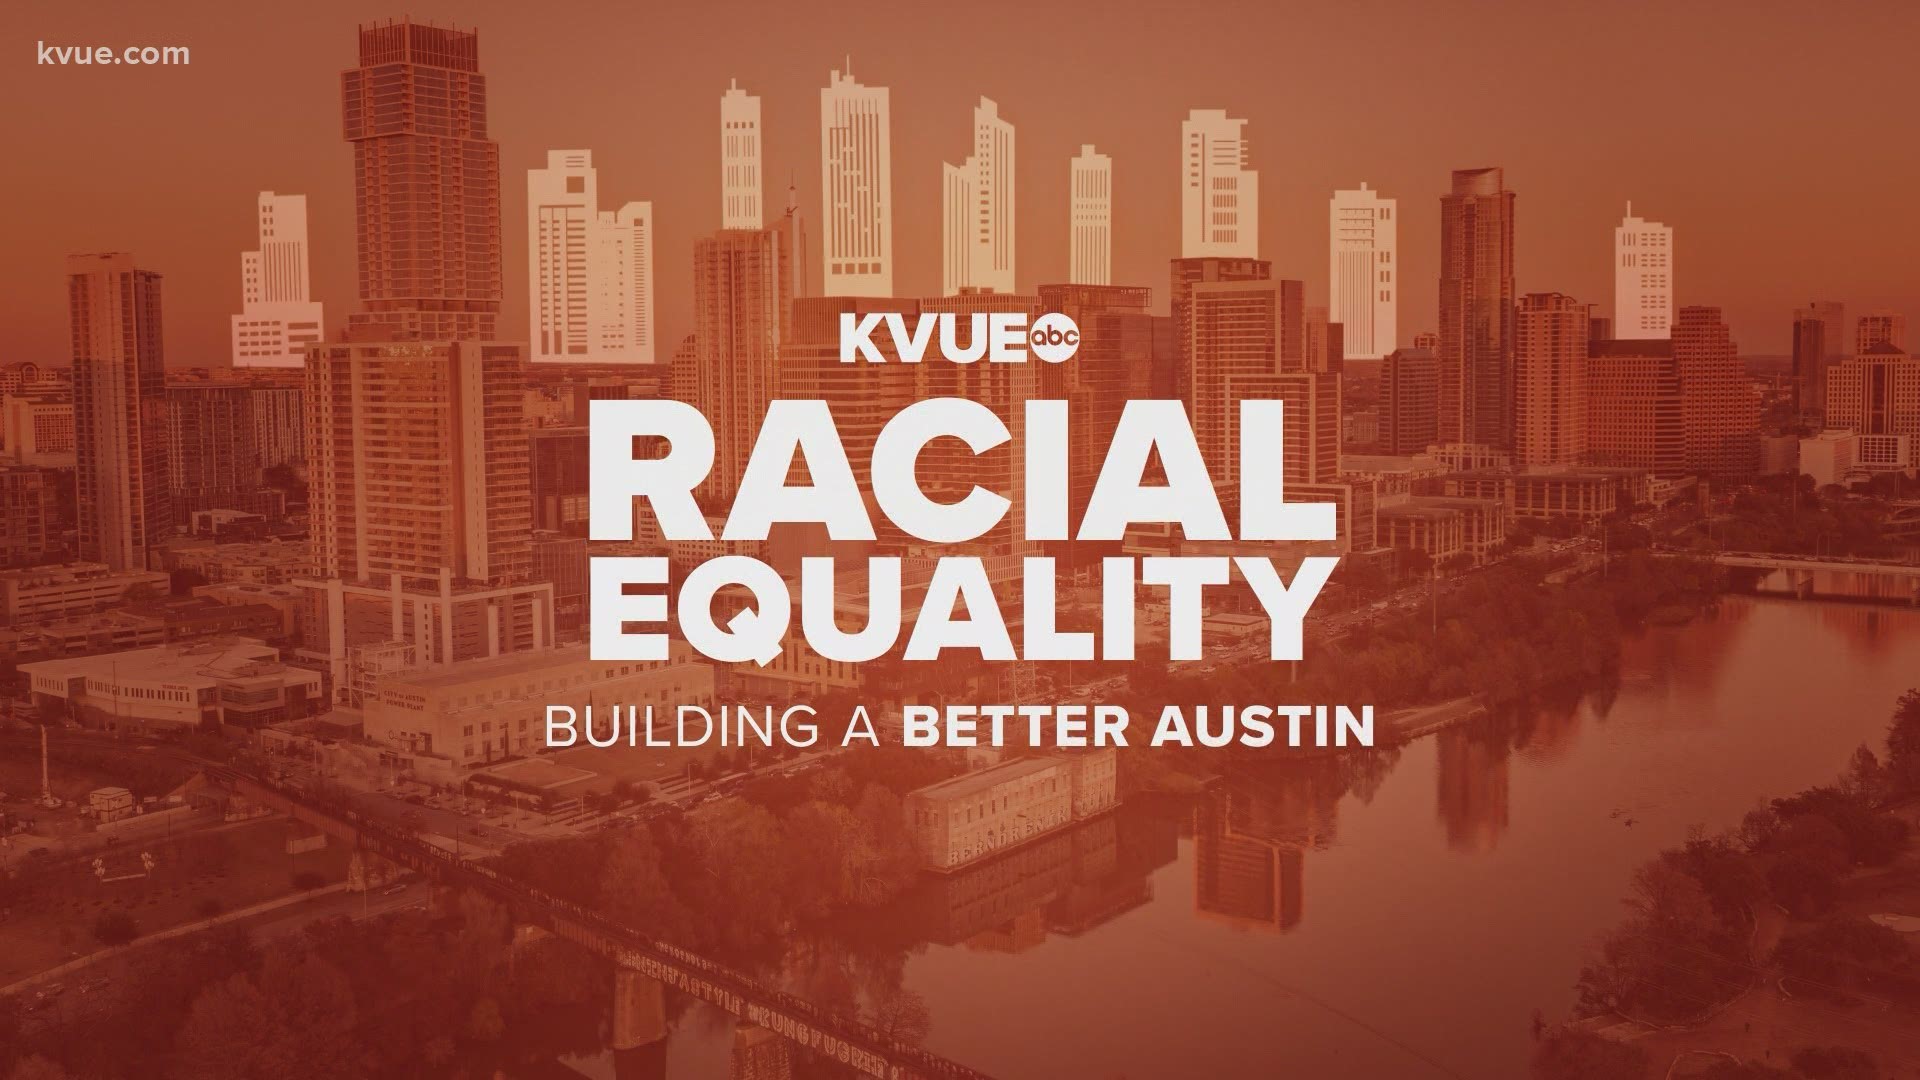 In honor of Asian American Pacific Islander Heritage Month, we're continuing our series "Racial Equality: Building a Better Austin."